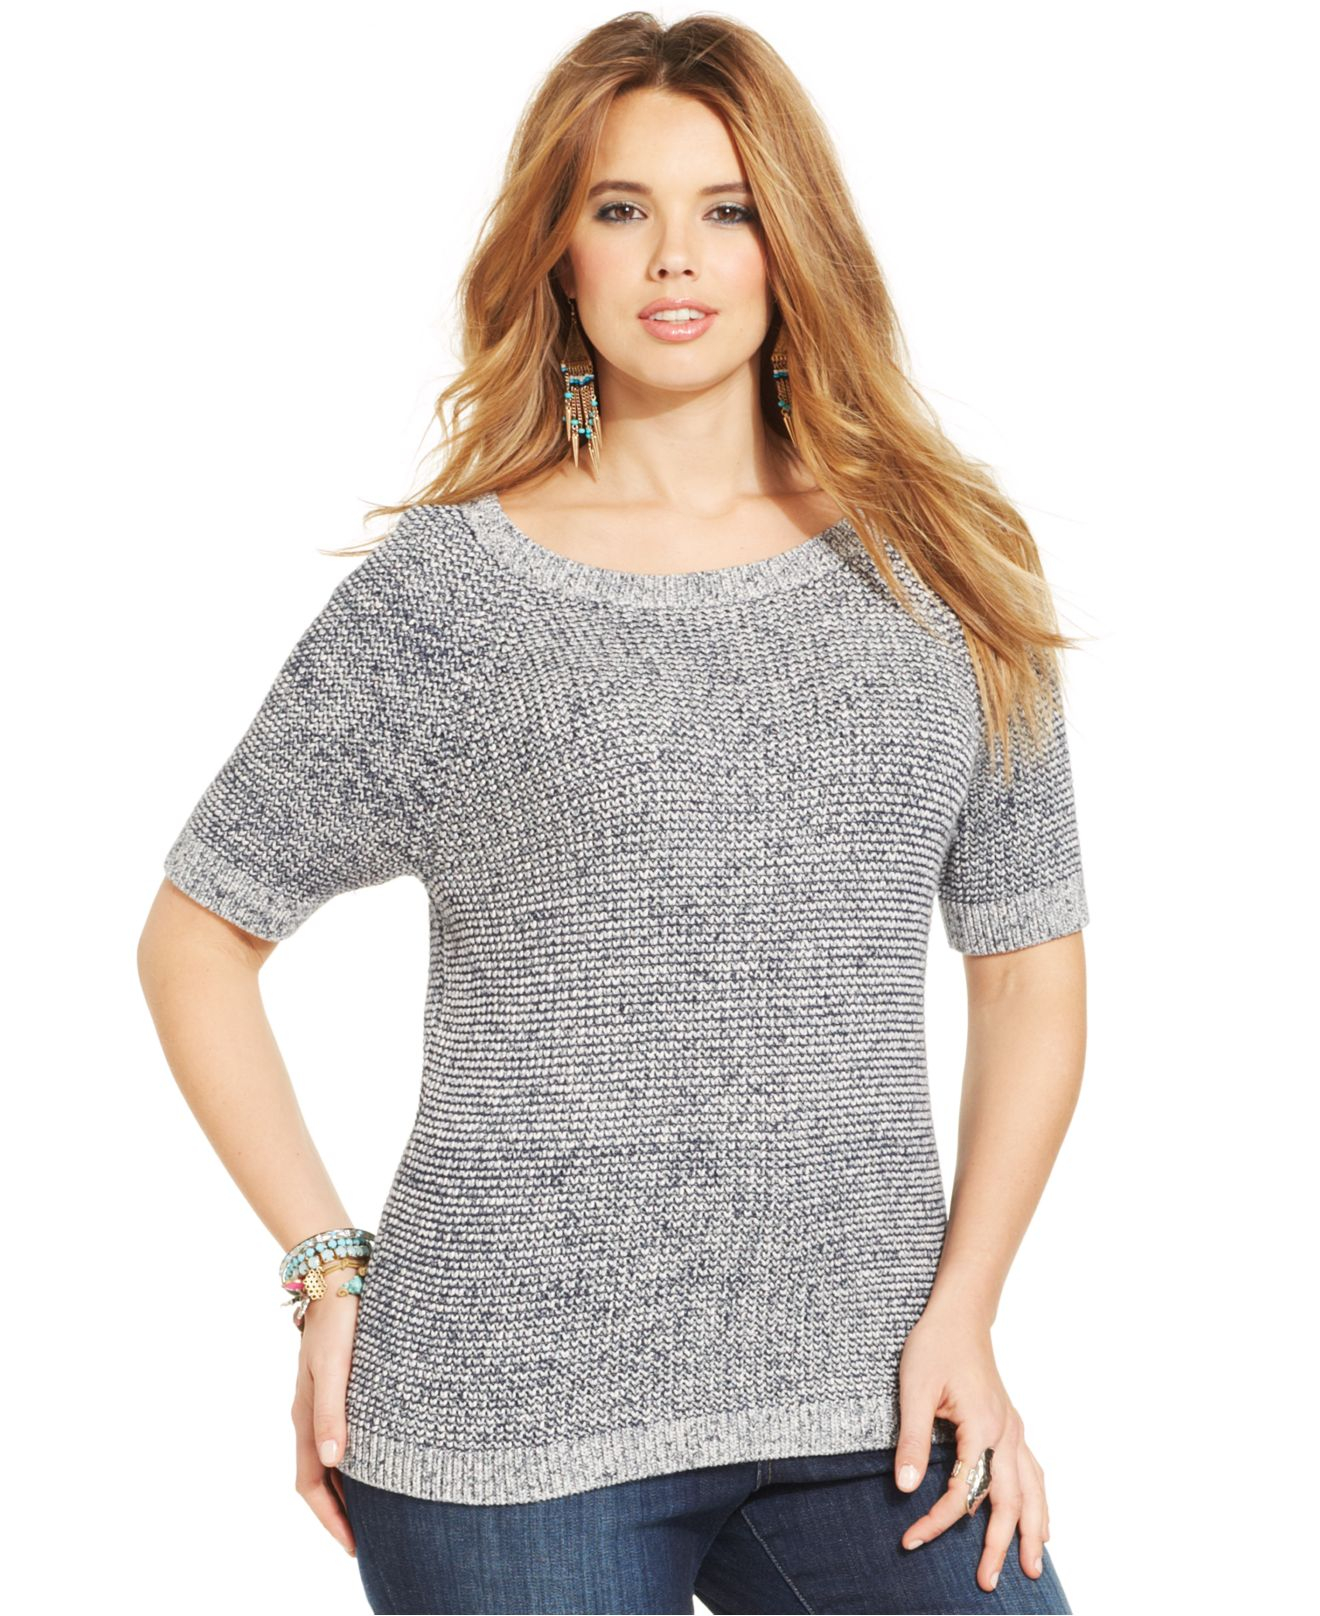 Lyst - Lucky brand Lucky Brand Plus Size Short-Sleeve Sweater in Blue